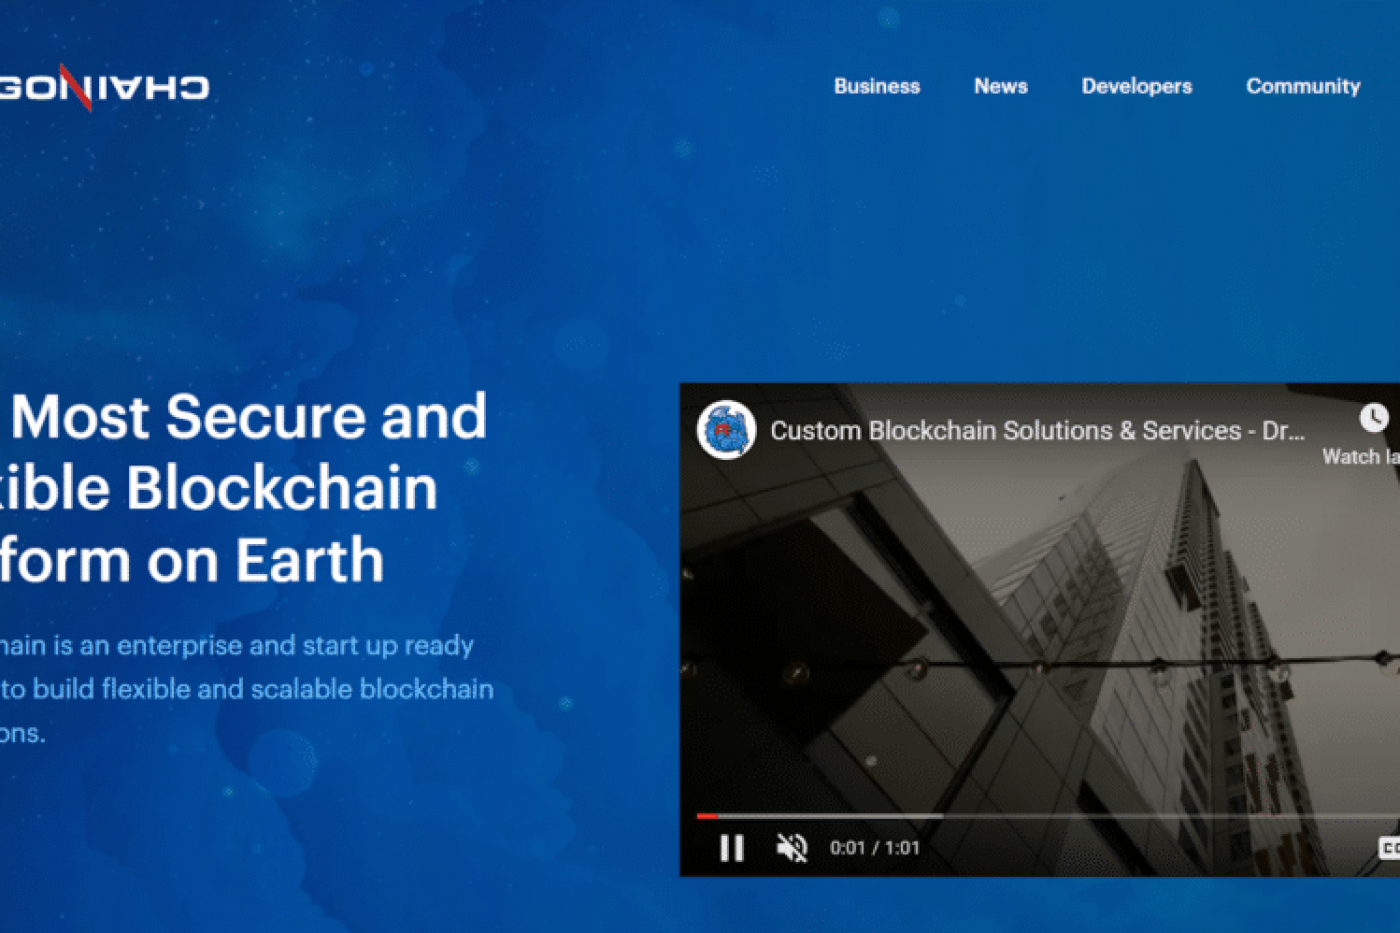 All You Need To Know About Dragonchain Blockchain Solutions